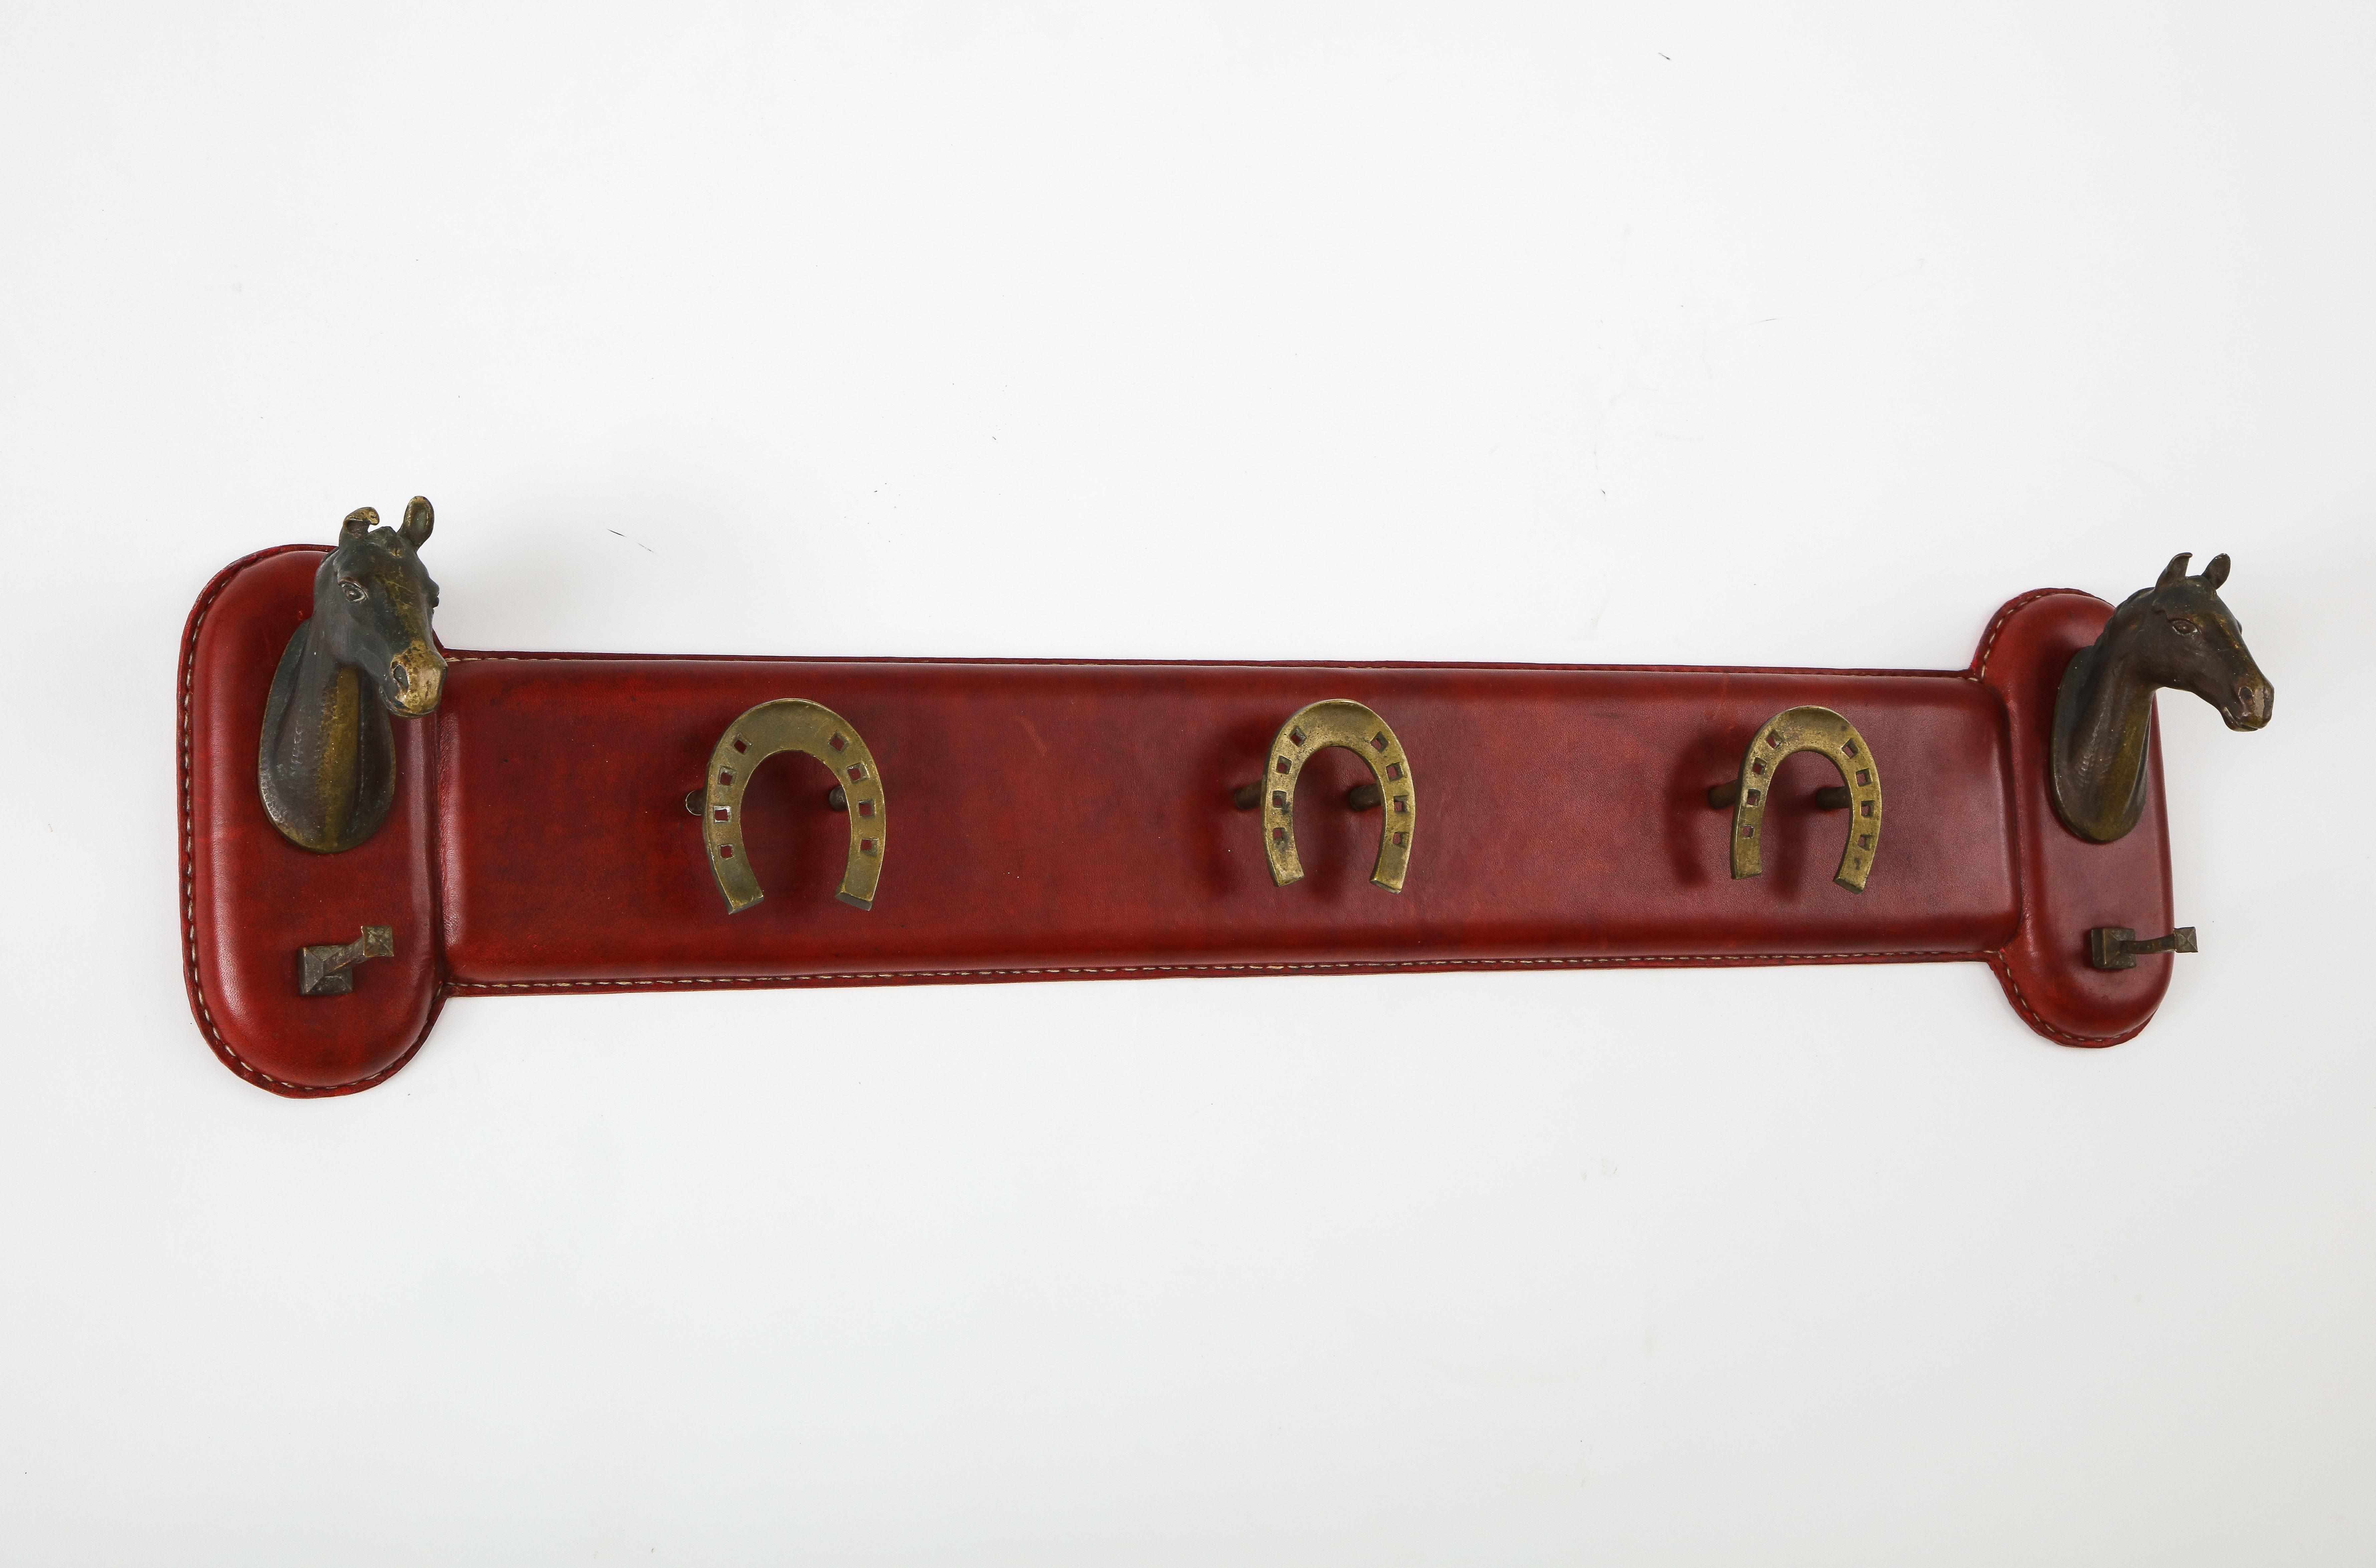 Very rare stitched leather coat rack by Jacques Adnet
Perfect shape.